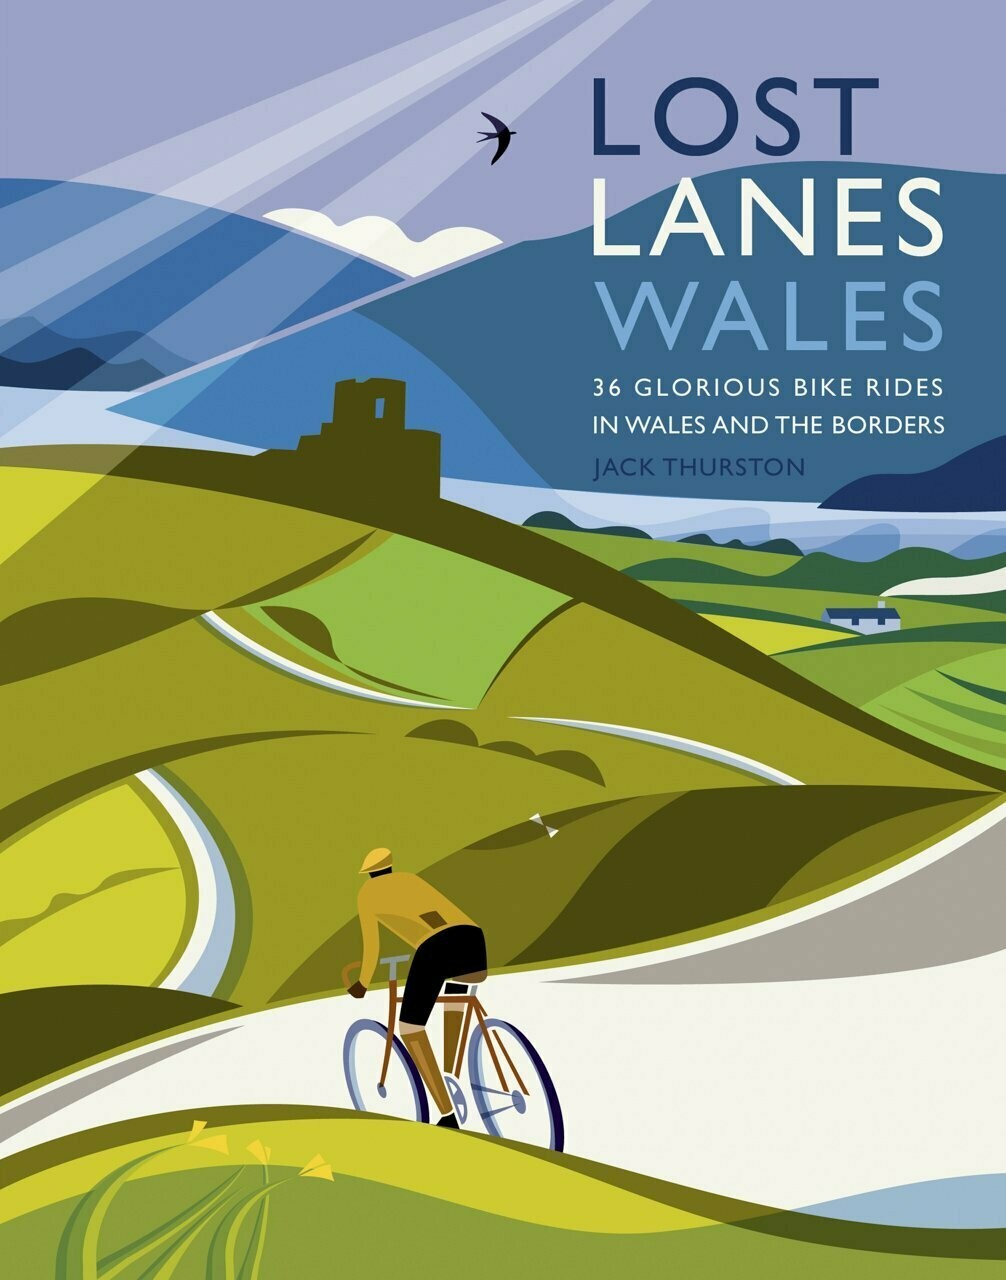 Lost Lanes Wales: 36 Glorious Bike Rides in Wales and the Borders - Jack Thurston